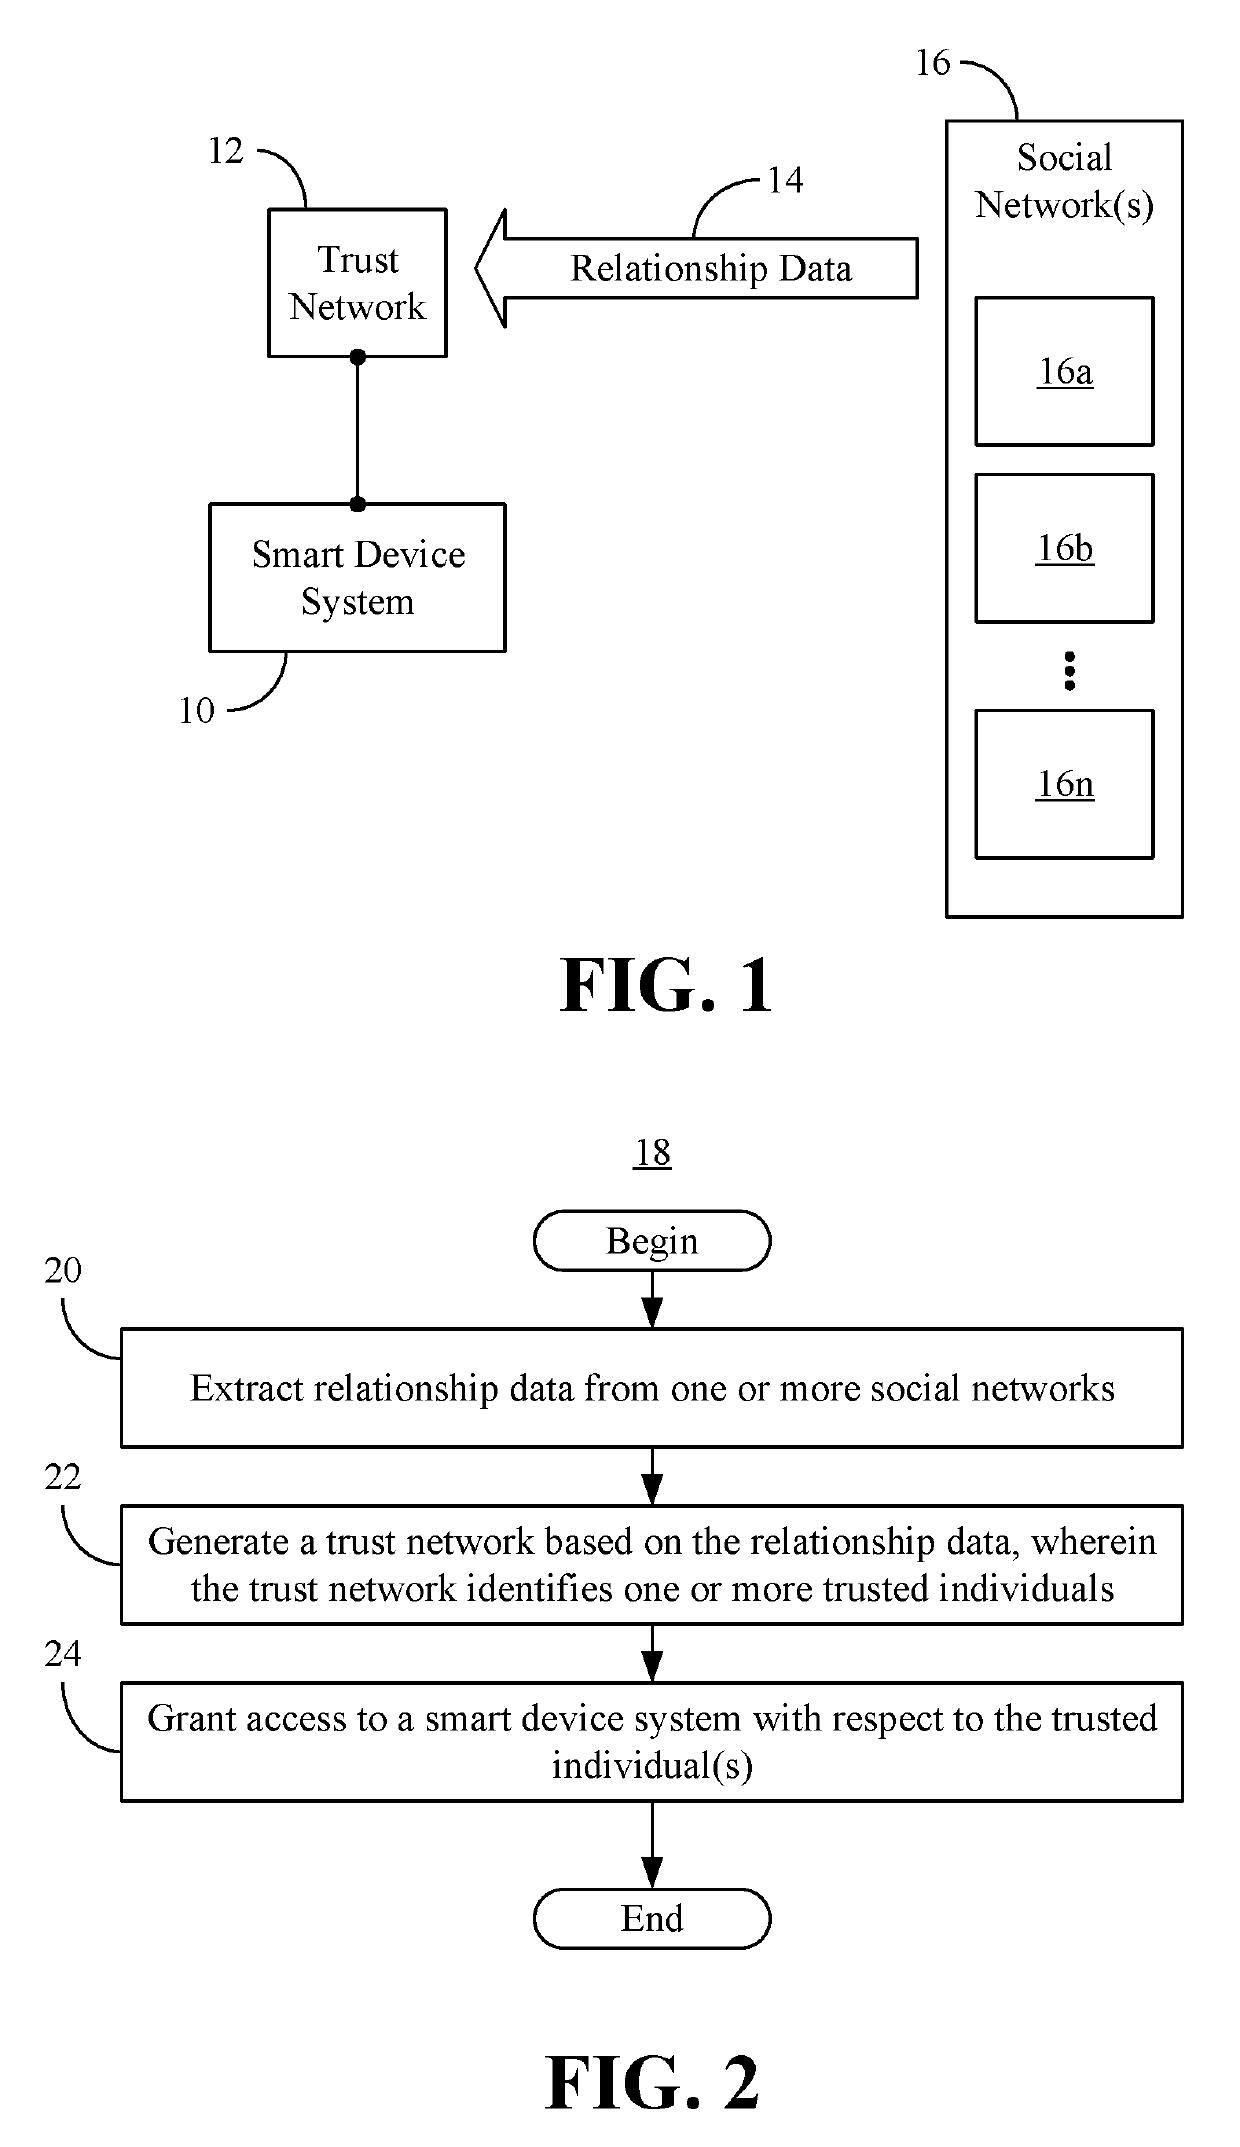 Integrating cognitive technology with social networks to identify and authenticate users in smart device systems